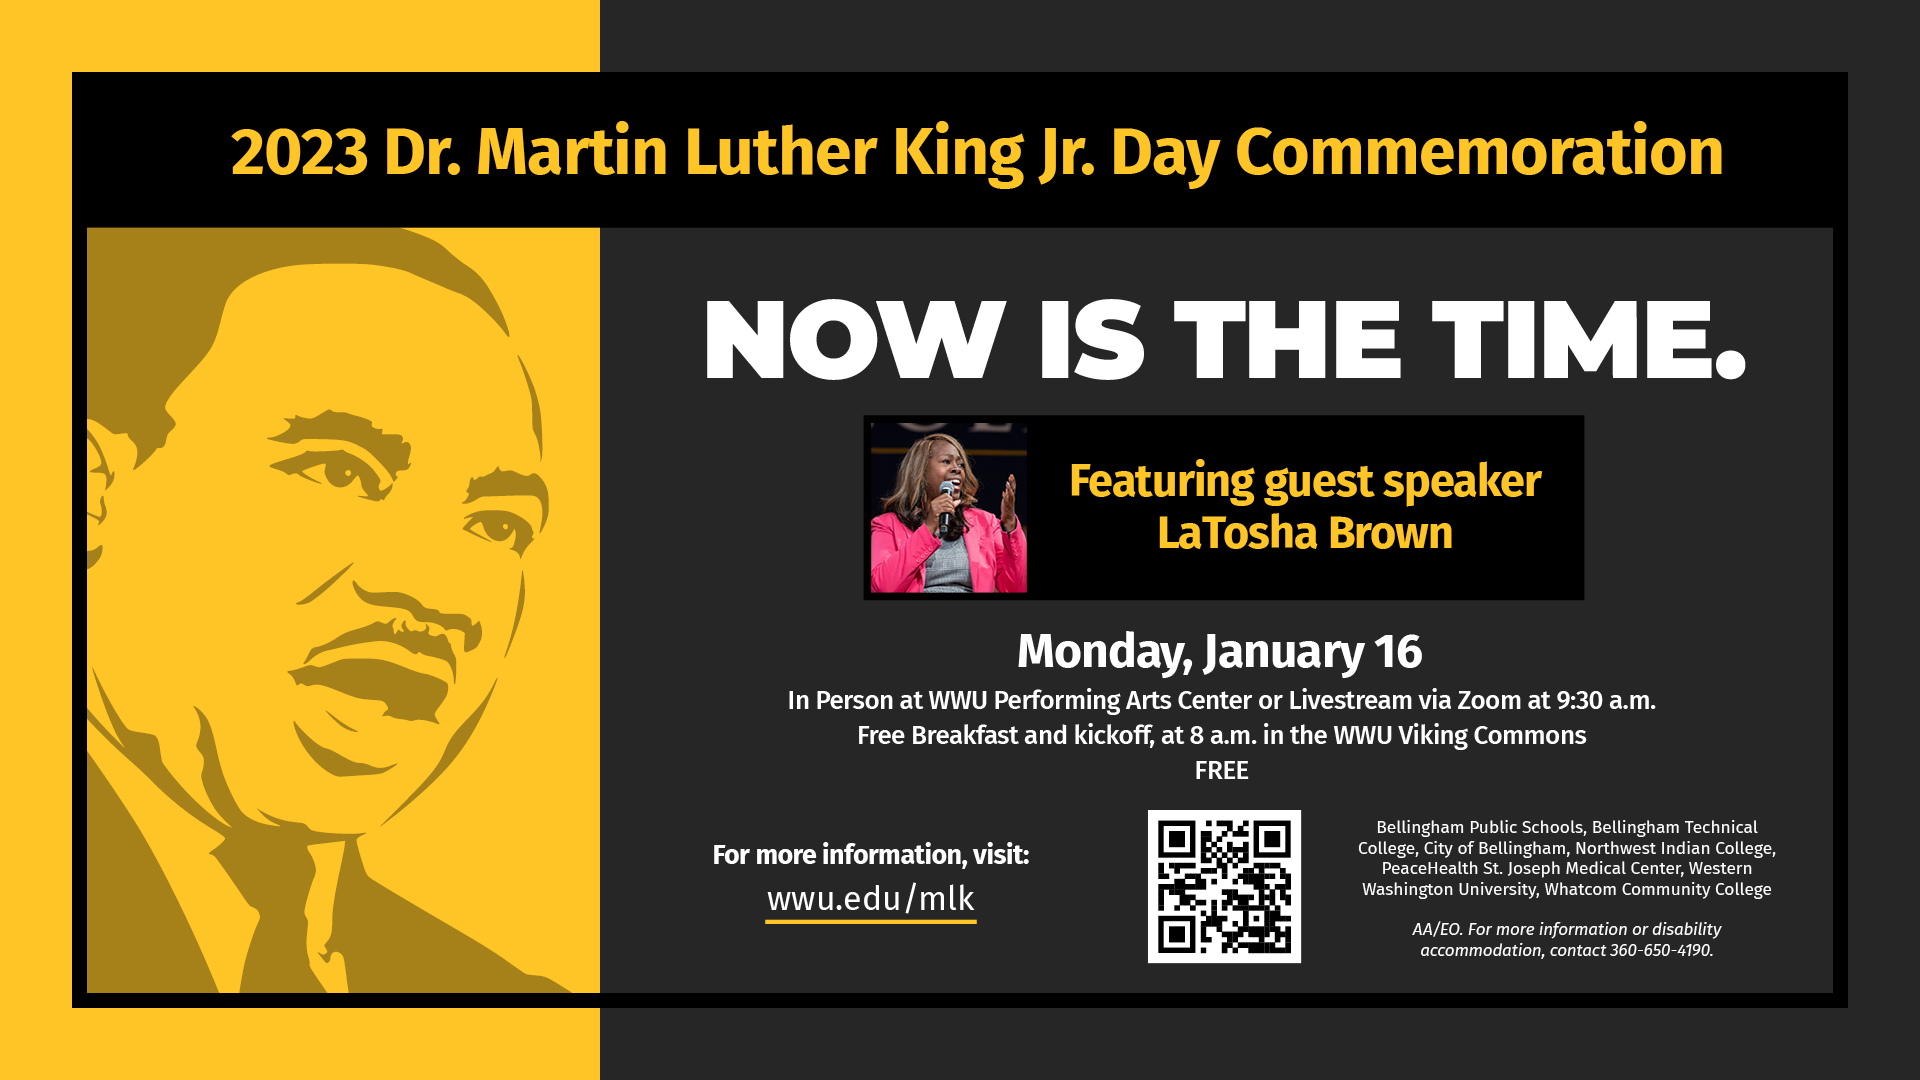 Event flyer featuring stylized art of Dr. Martin Luther King Jr, a headshot photo of guest speaker LaTosha Brown, and event details (listed below)